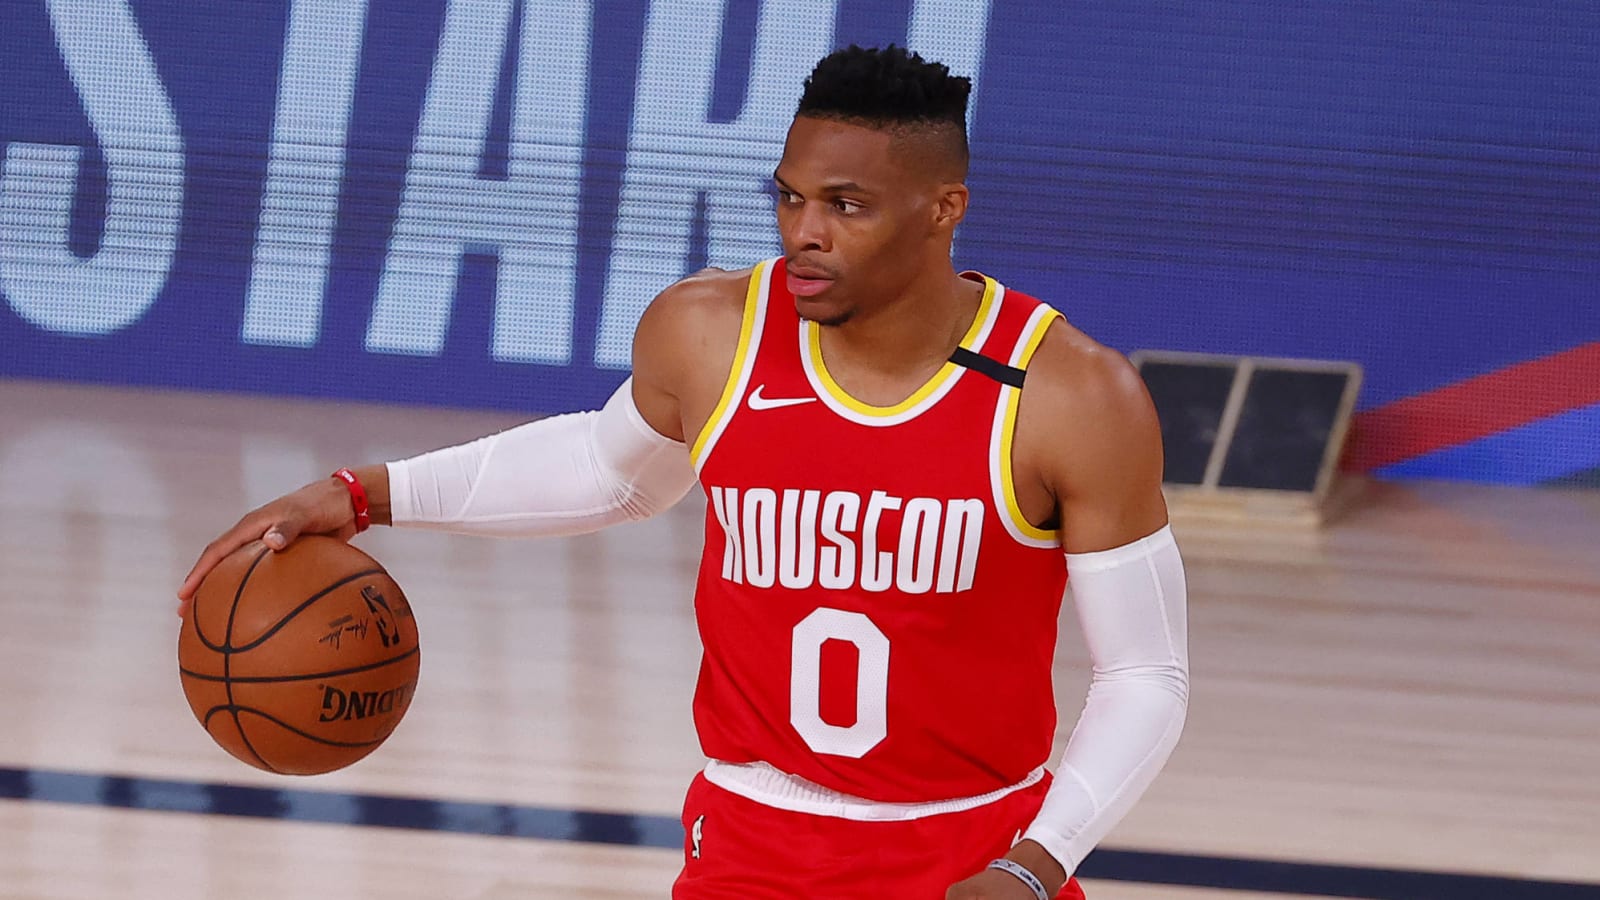 Russell Westbrook to miss at least first few playoff games